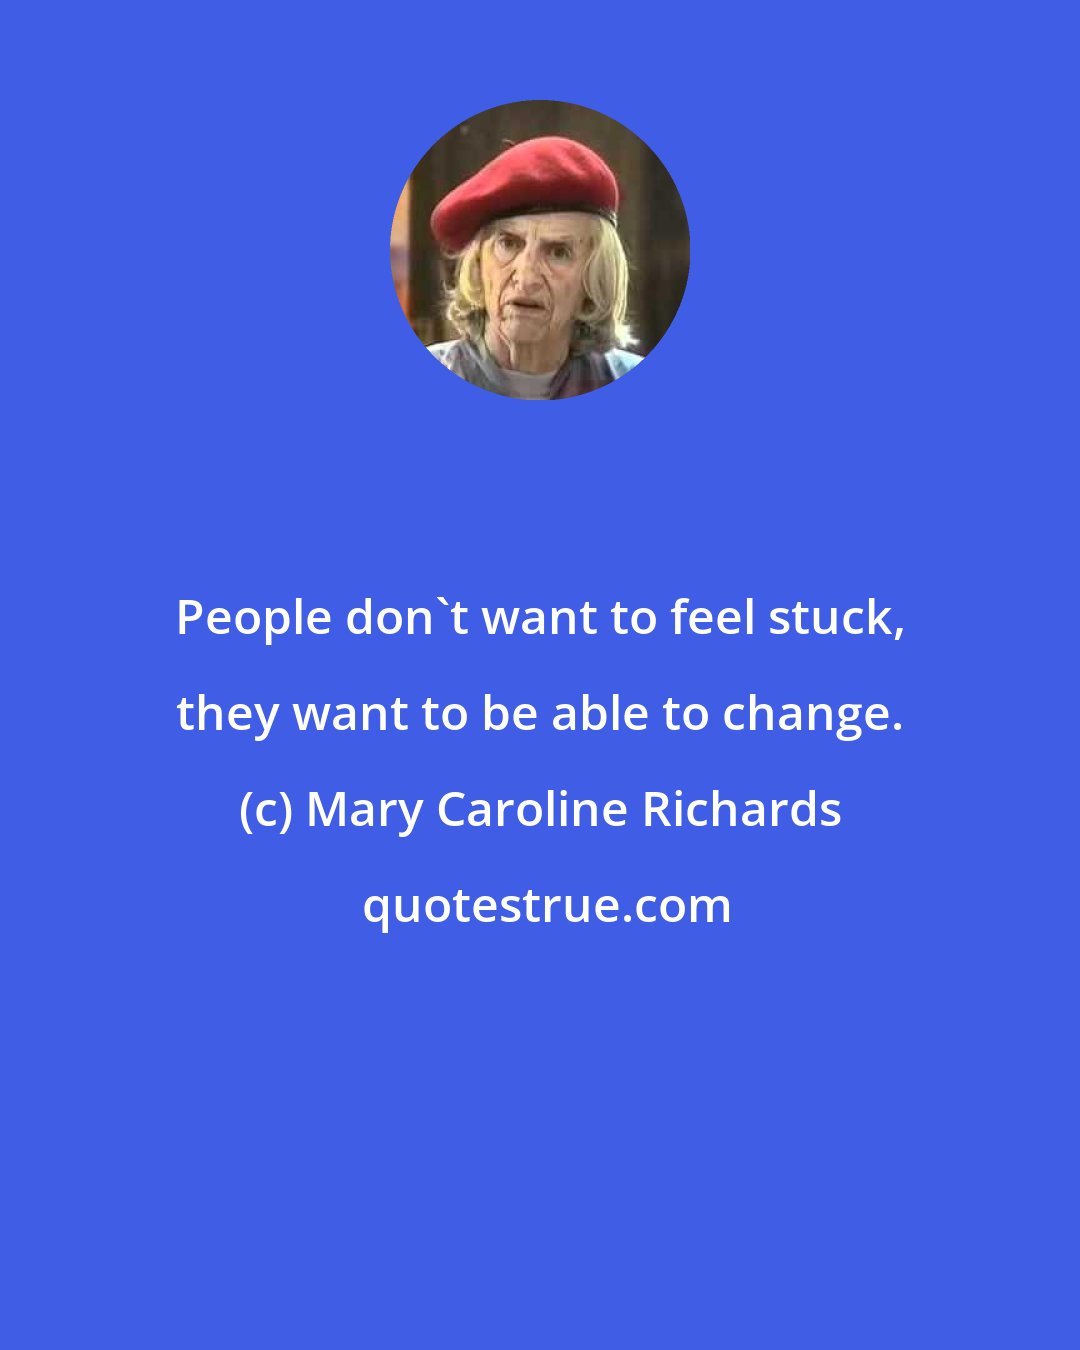 Mary Caroline Richards: People don't want to feel stuck, they want to be able to change.